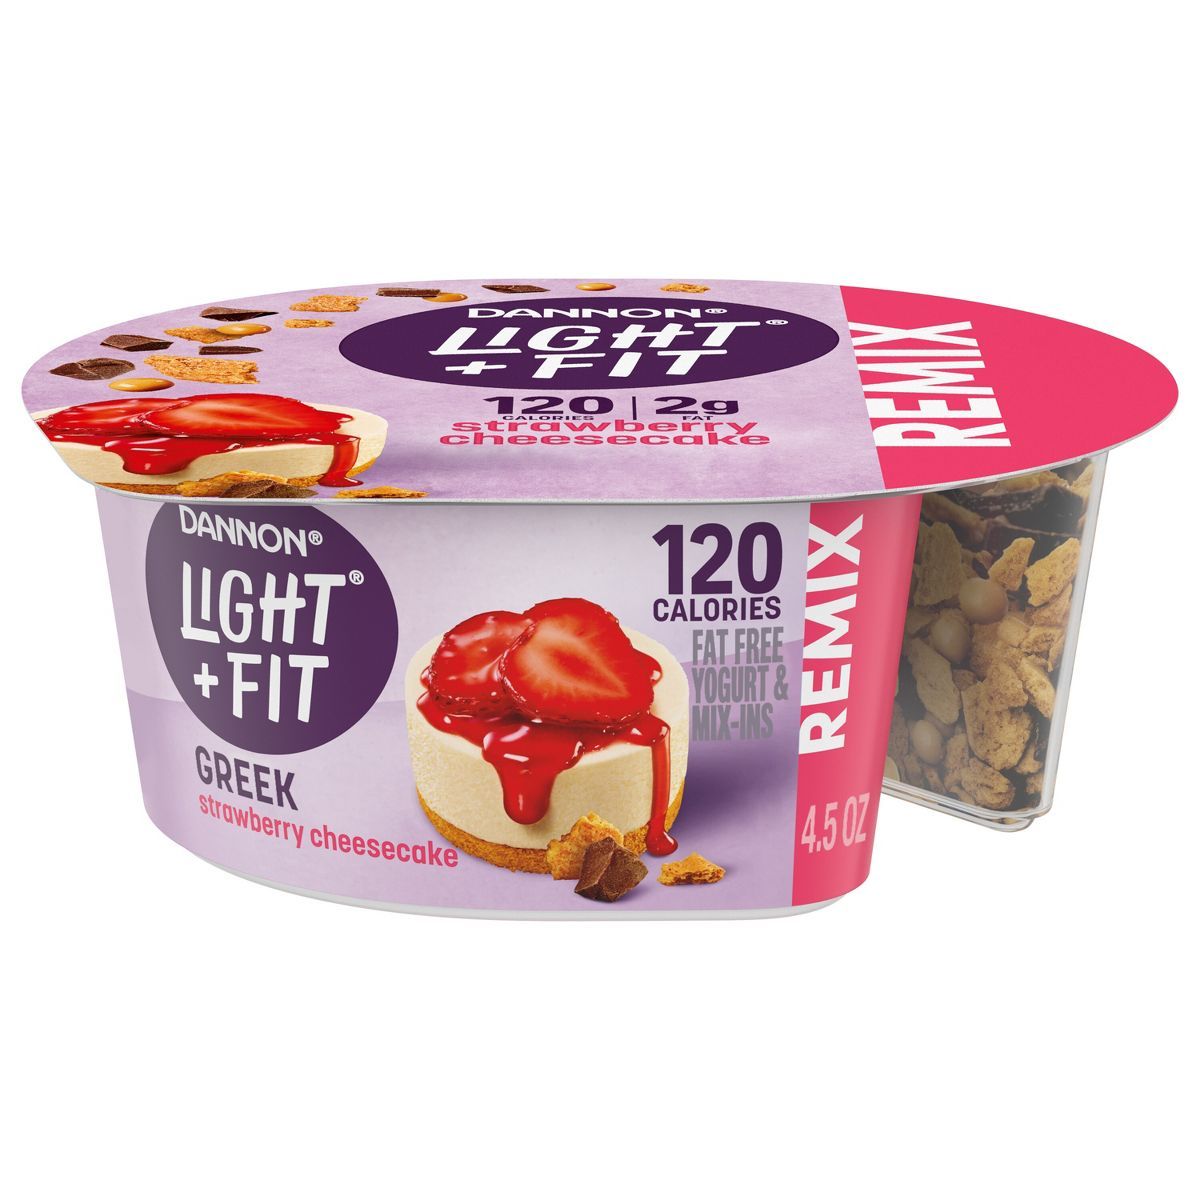 Light + Fit Mixin Strawberry Cheesecake with Chocolate and Graham Greek Yogurt - 4.5oz Cup | Target